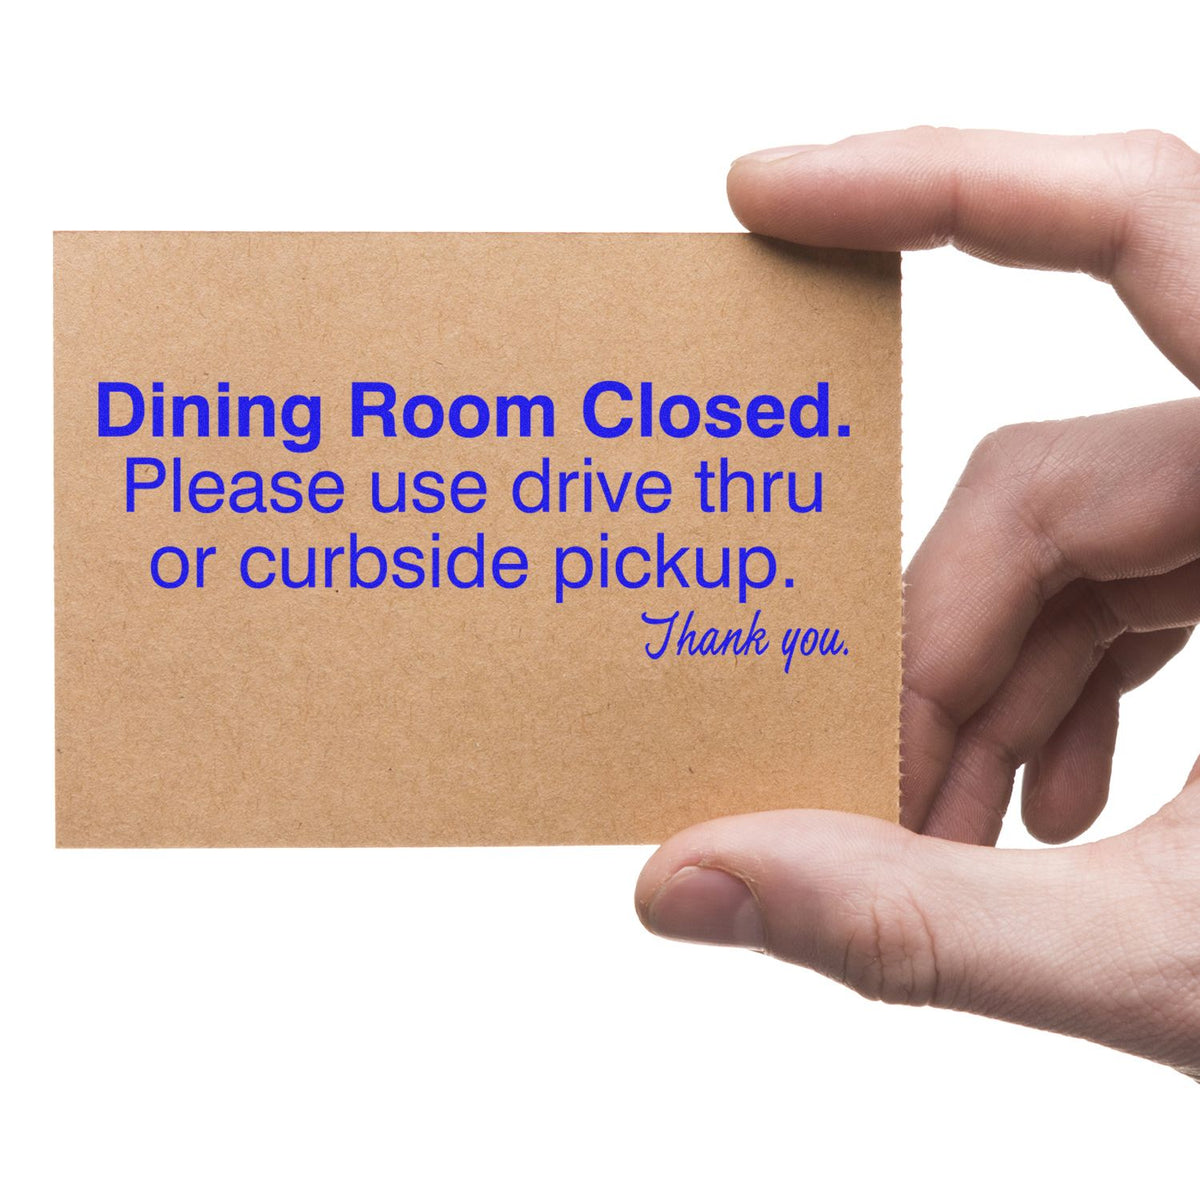 Slim Pre-Inked Dining Room Closed Stamp In Use Photo